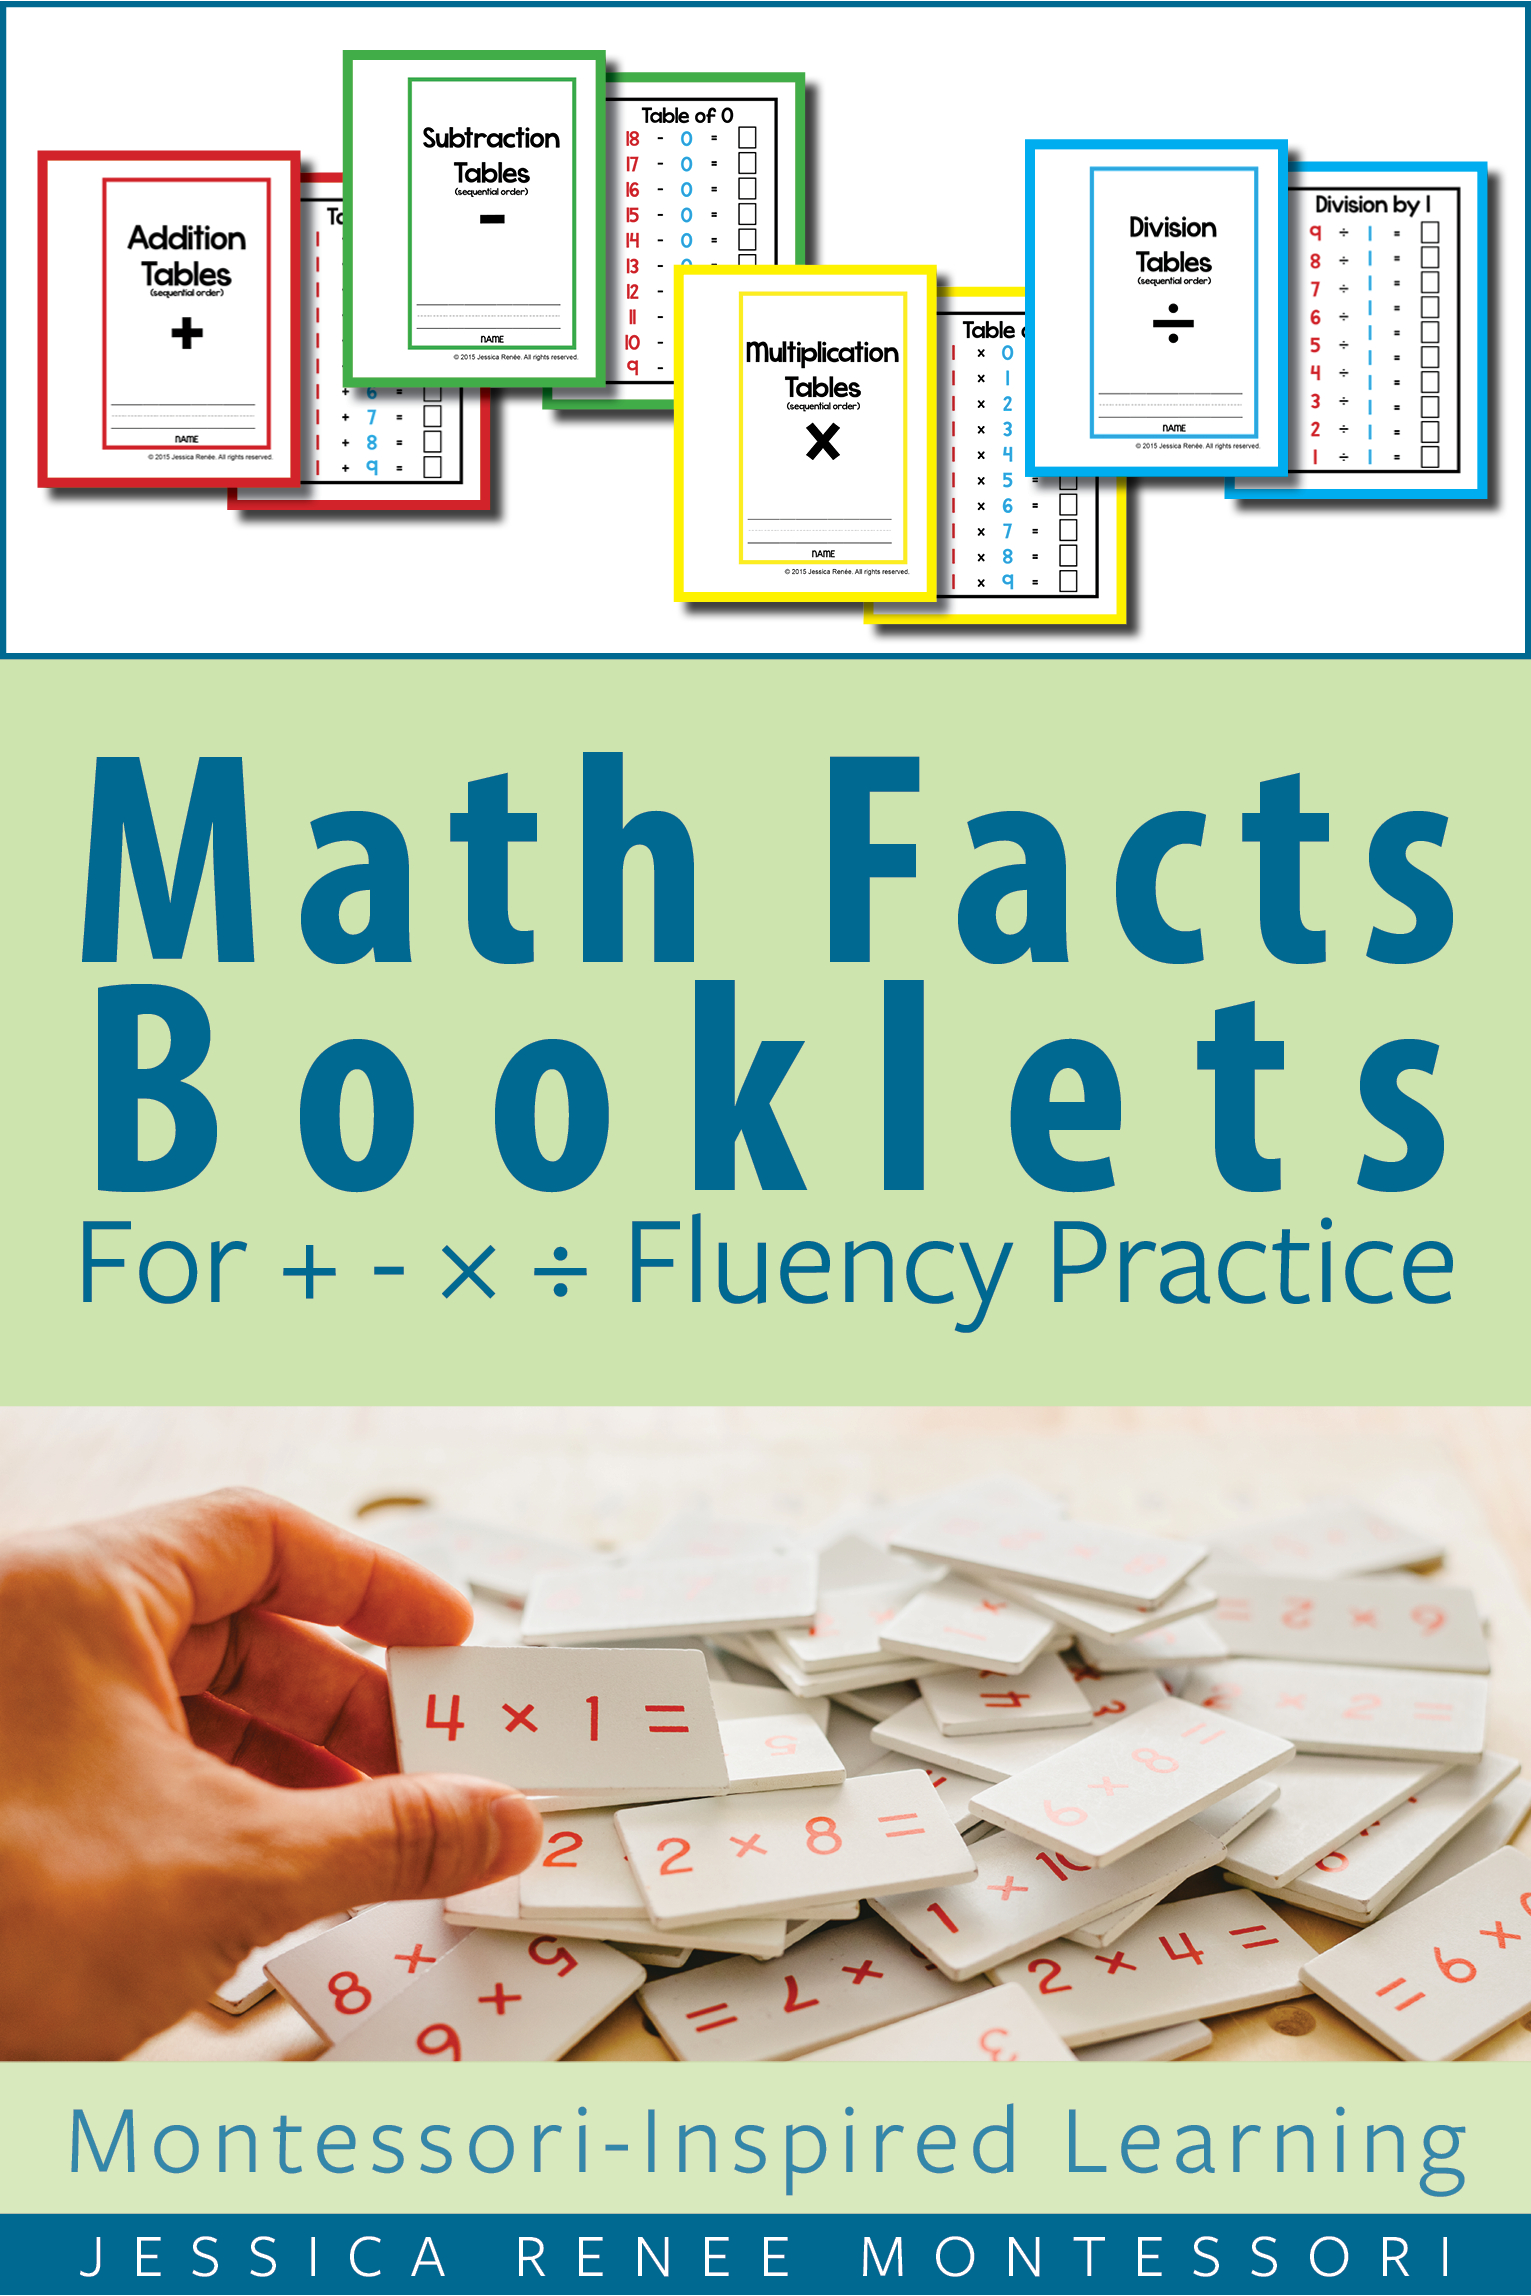 Math Facts Booklets For Fluency Practice | Jessica Renée in Printable Multiplication Booklets